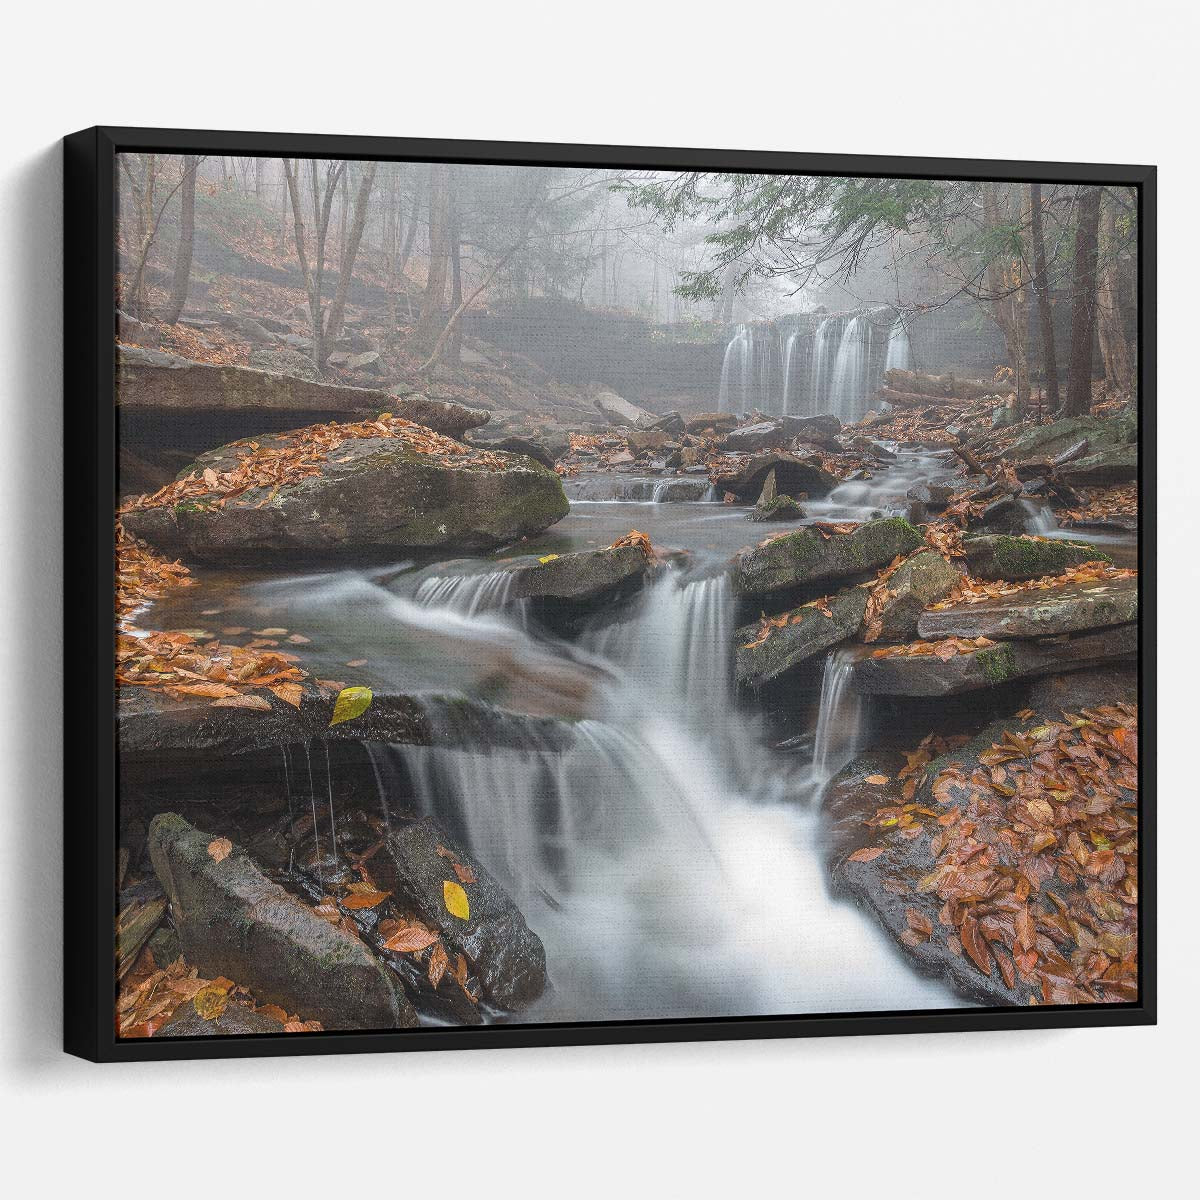 Autumn Morning Mist Waterfall in Ricketts Glen Wall Art by Luxuriance Designs. Made in USA.